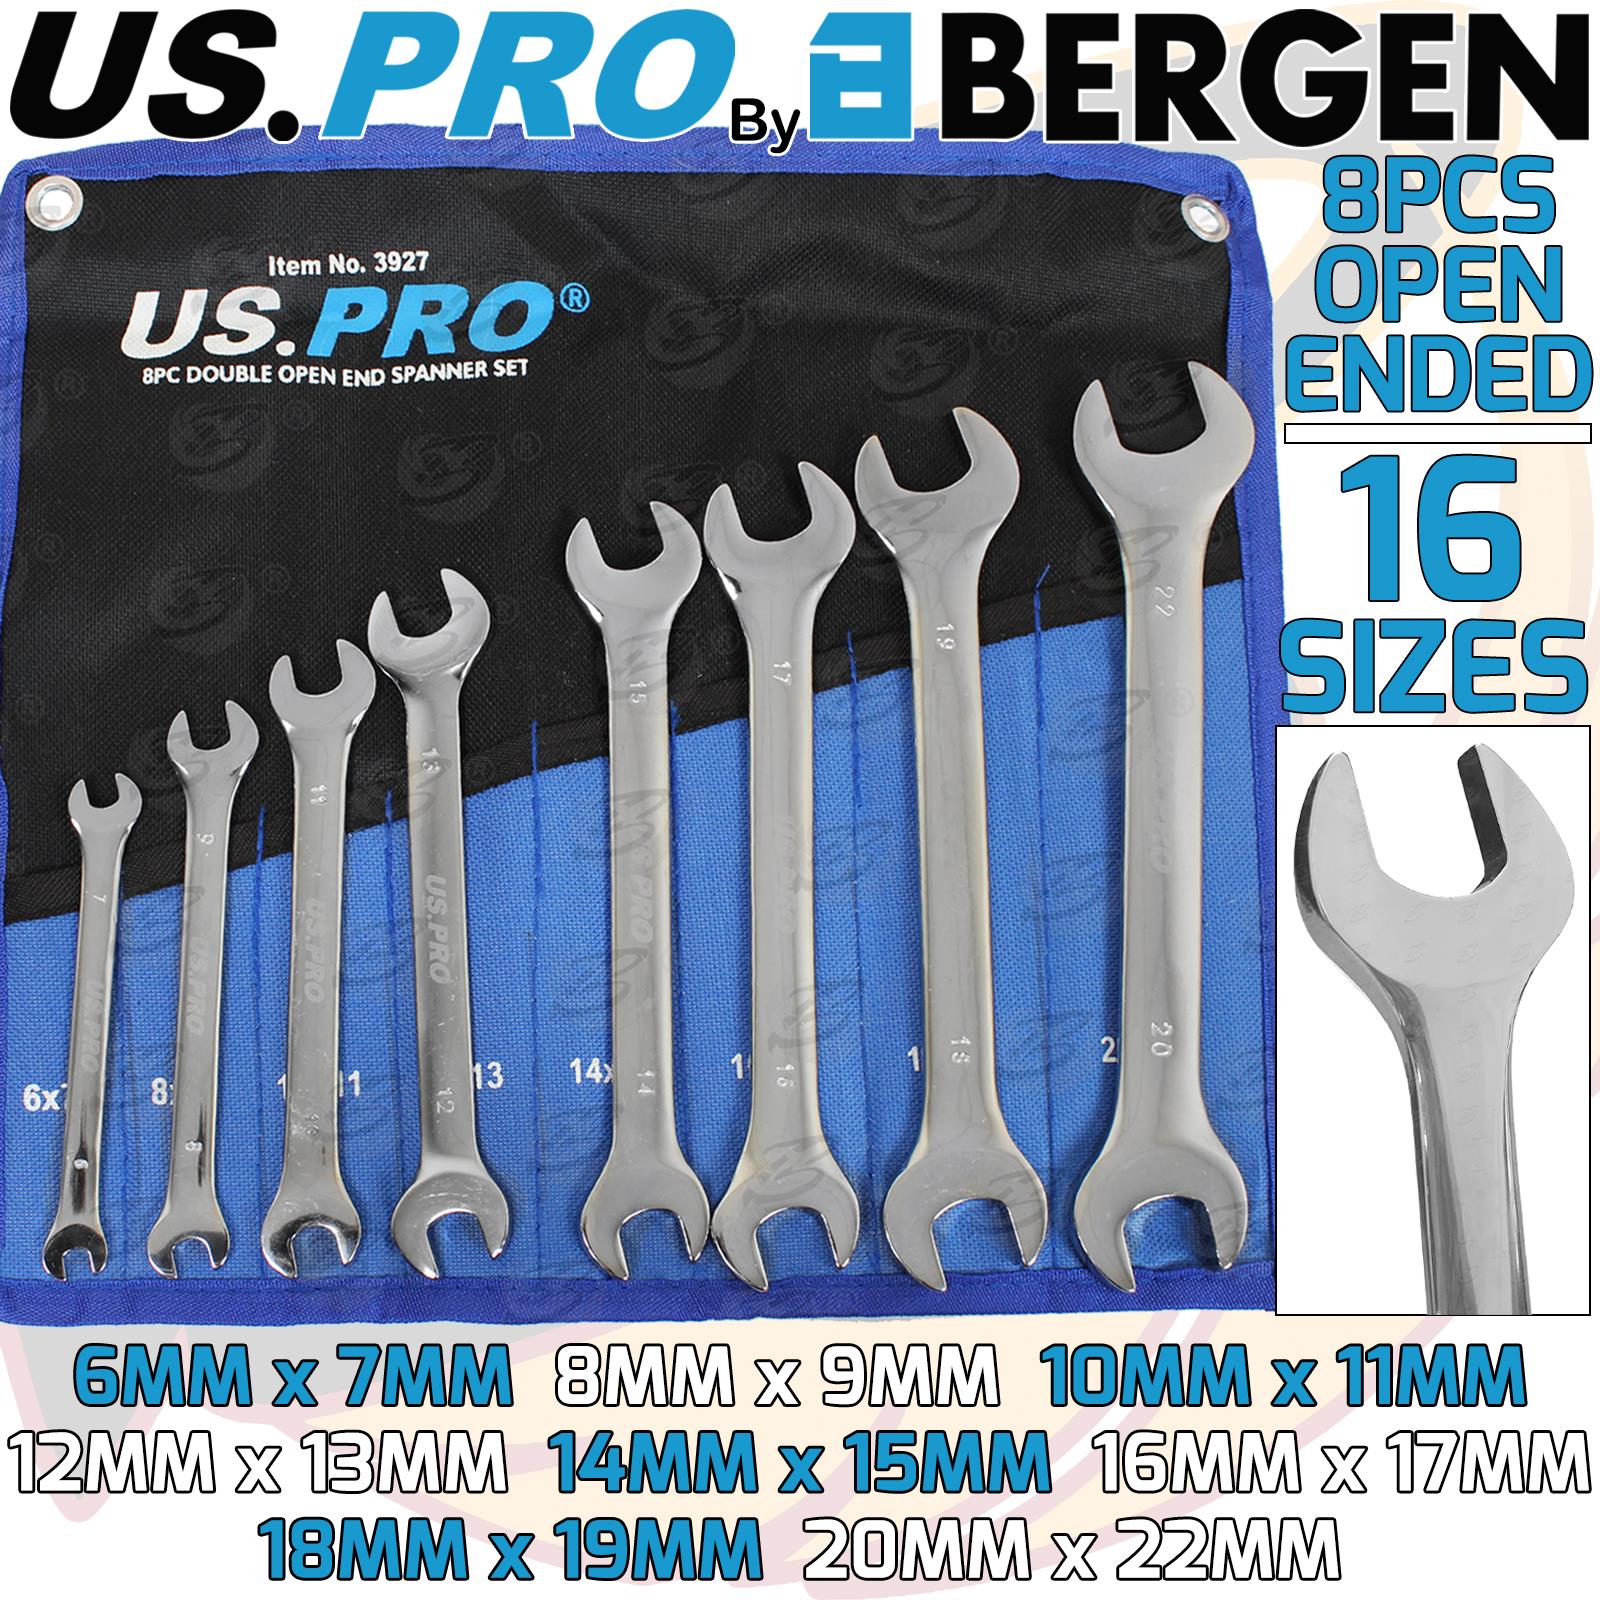 US PRO 8PCS DOUBLE OPEN ENDED SPANNERS 6MM - 22MM